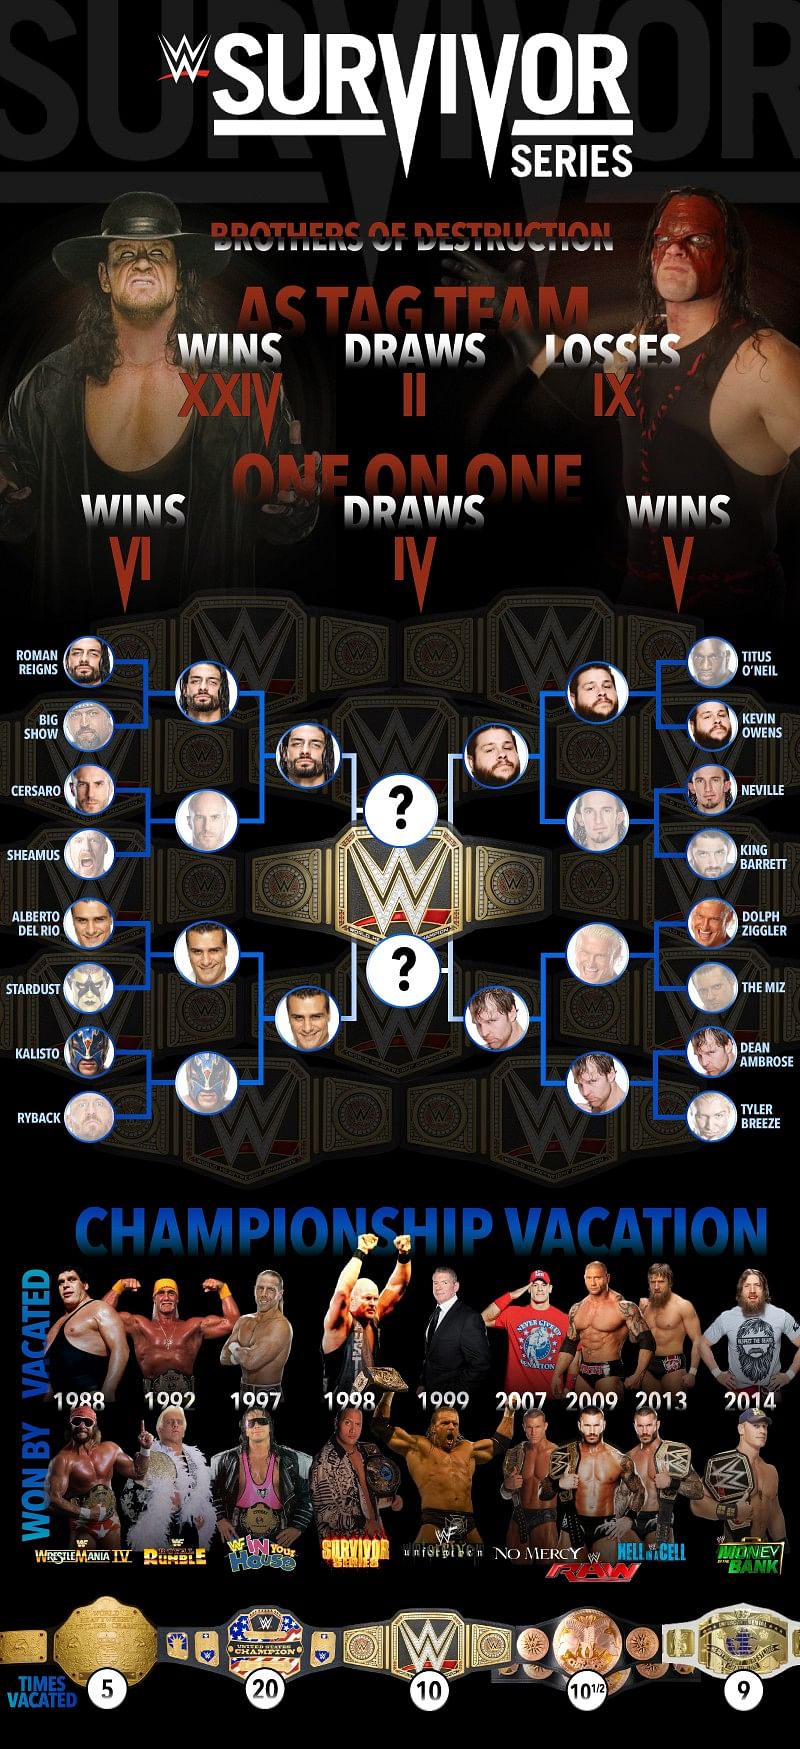 WWE Survivor Series infographic and updated match card